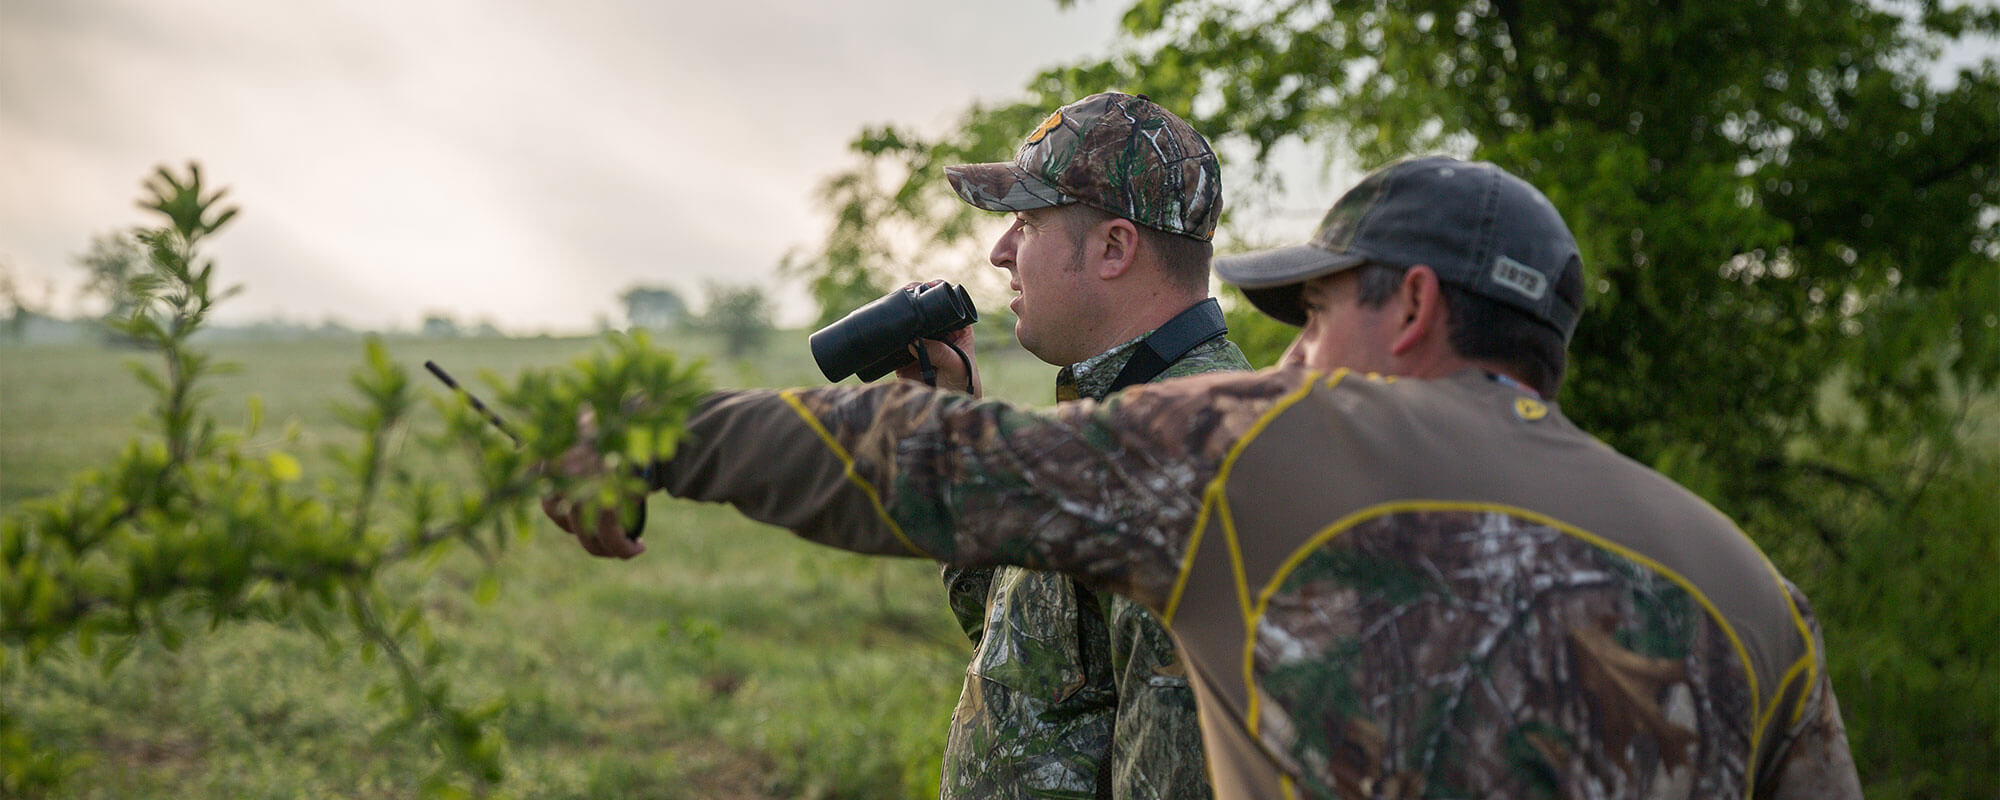 Two hunters standing on a hill looking across a field. One is holding binoculars and the other is pointing toward the field.